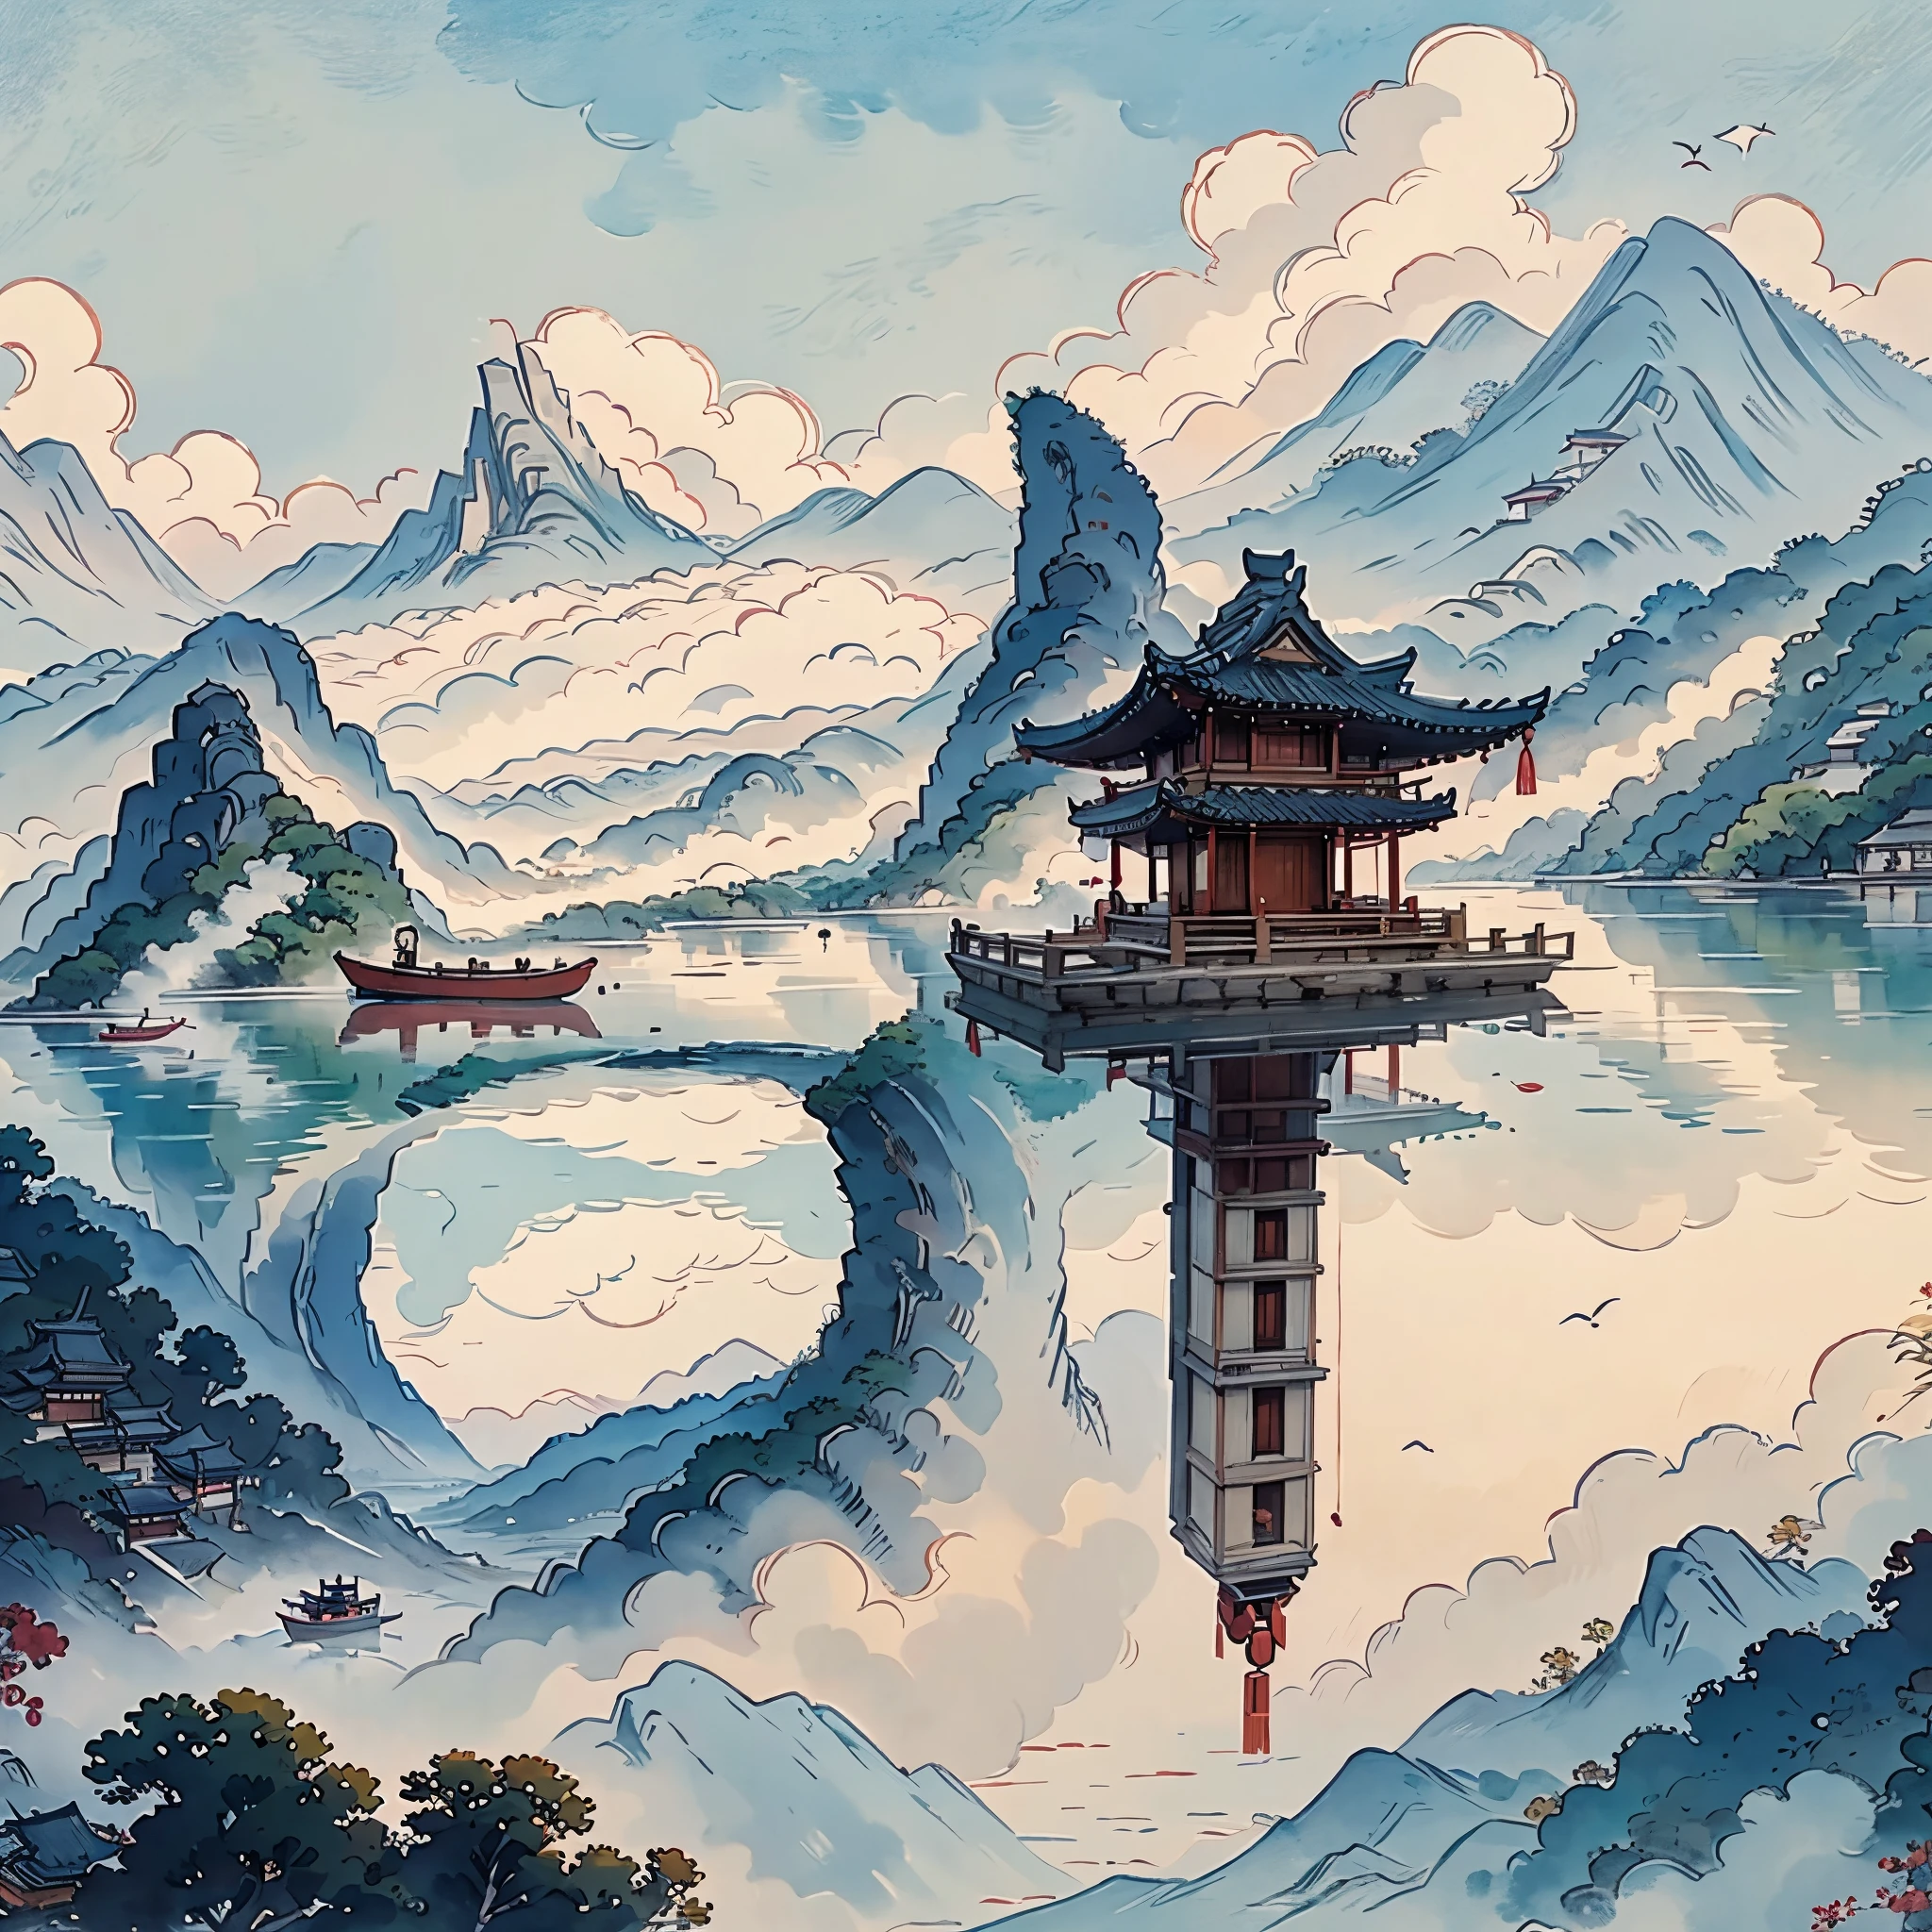 Mountain painting with a pagoda on a small island, chinese watercolor style, chinese painting style, digital painting of a pagoda, Chinese landscape, traditional Chinese watercolor painting, chinese paintings, Japan Art Style, High detail watercolor 8K, highly detailed water colour 8 k, detailed painting 4 k, author：heroes, japanese painting, author：Qu Leile，light and shadows